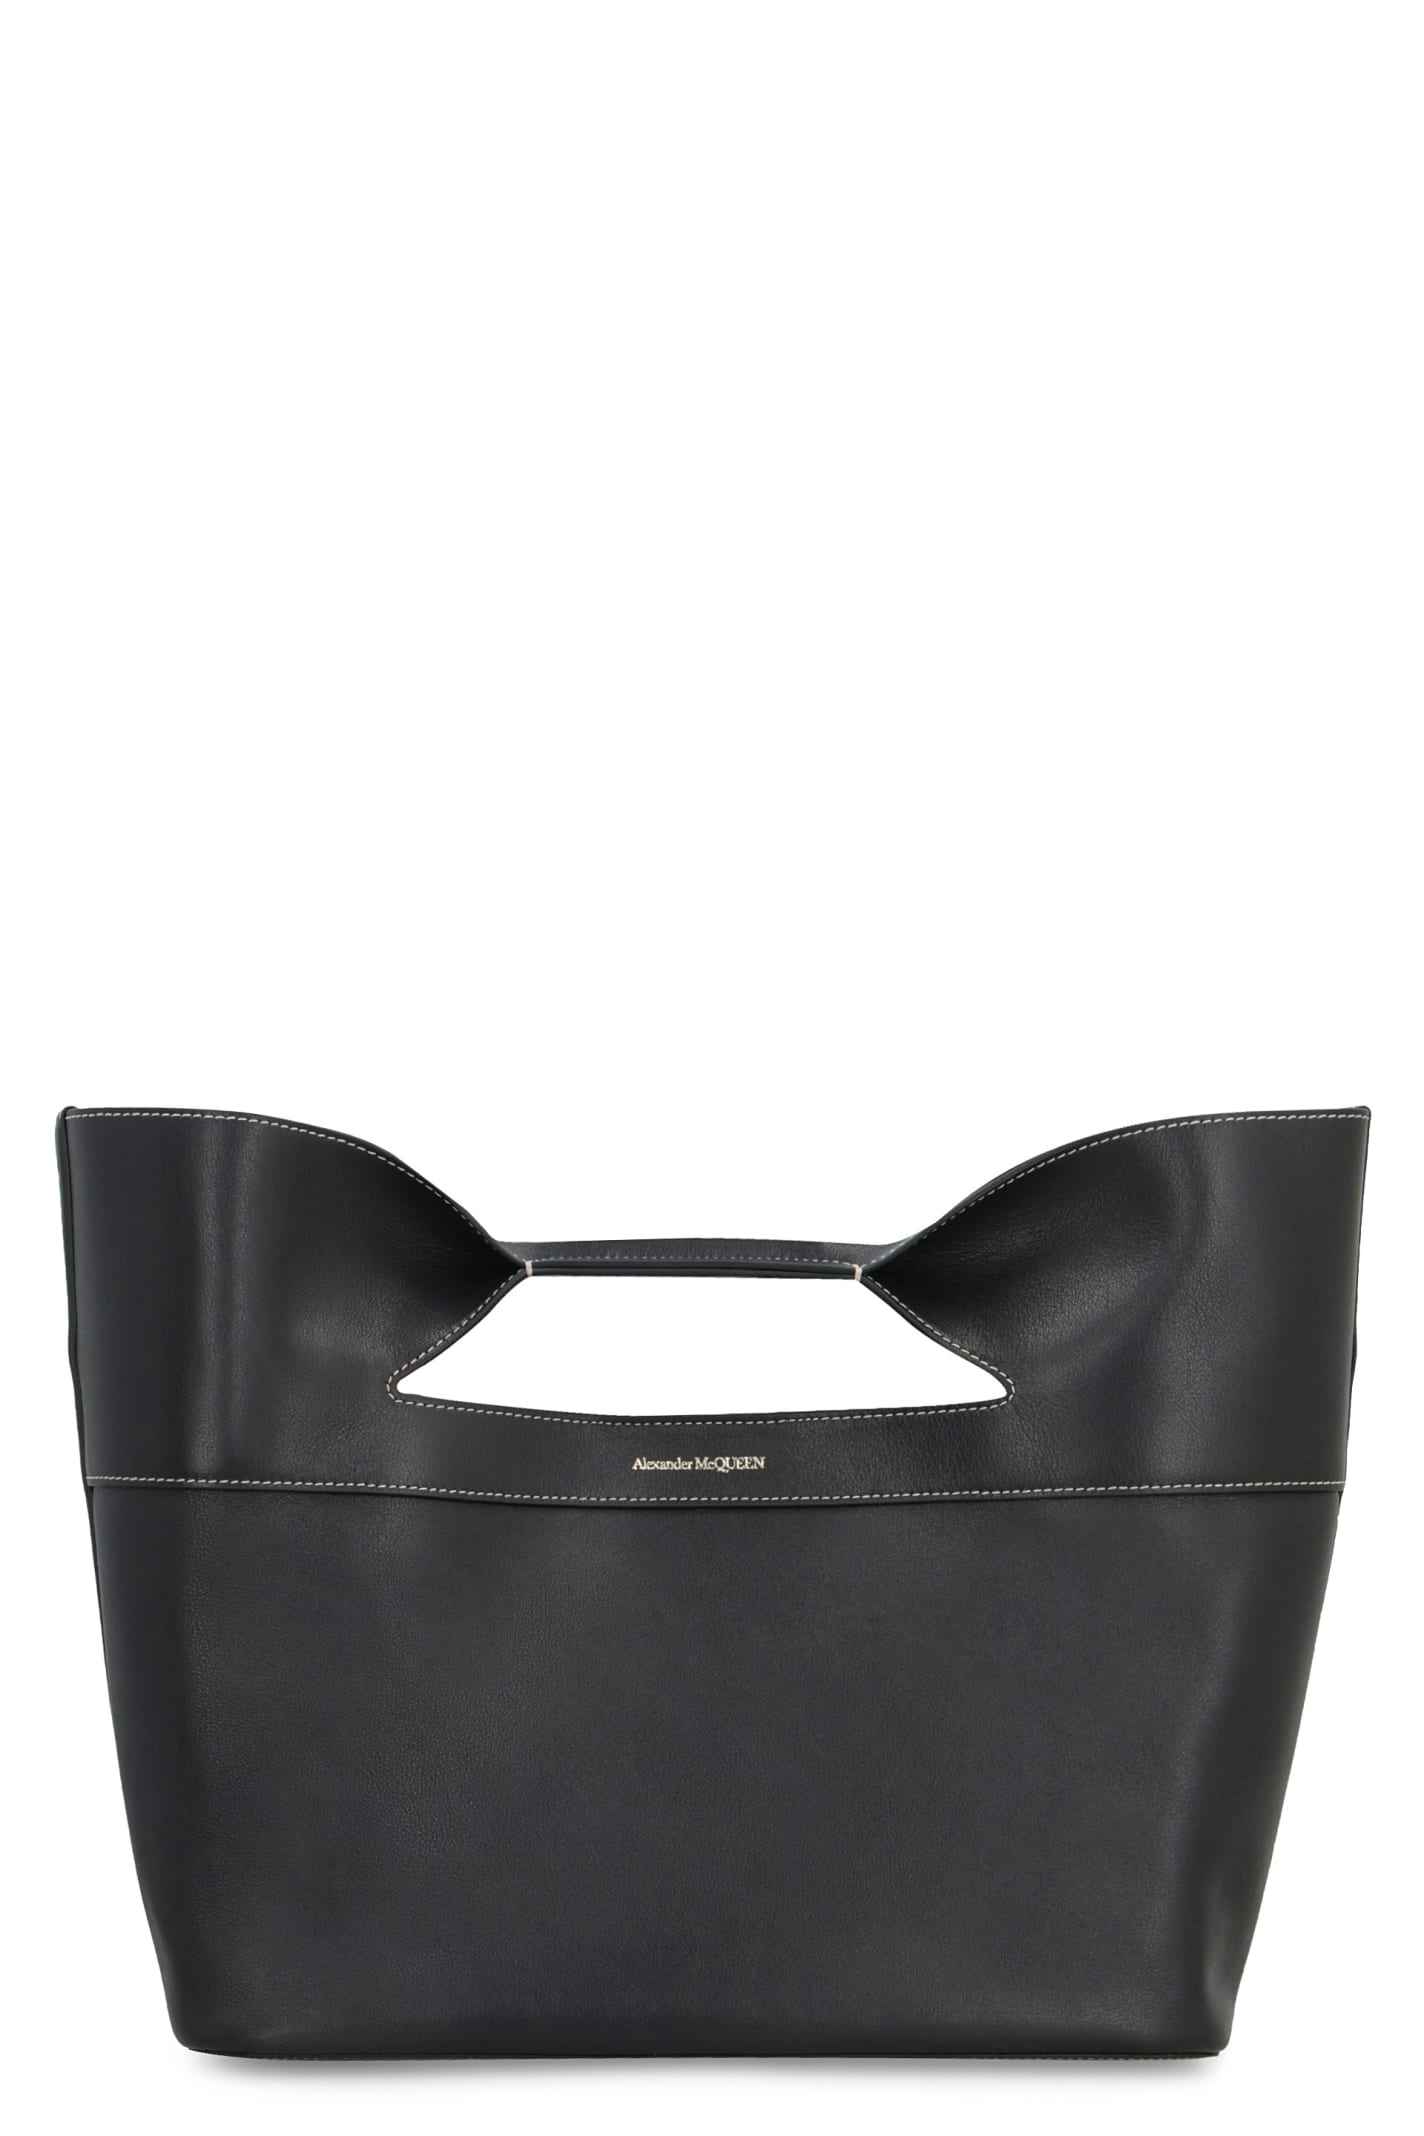 ALEXANDER MCQUEEN THE BOW LEATHER BAG